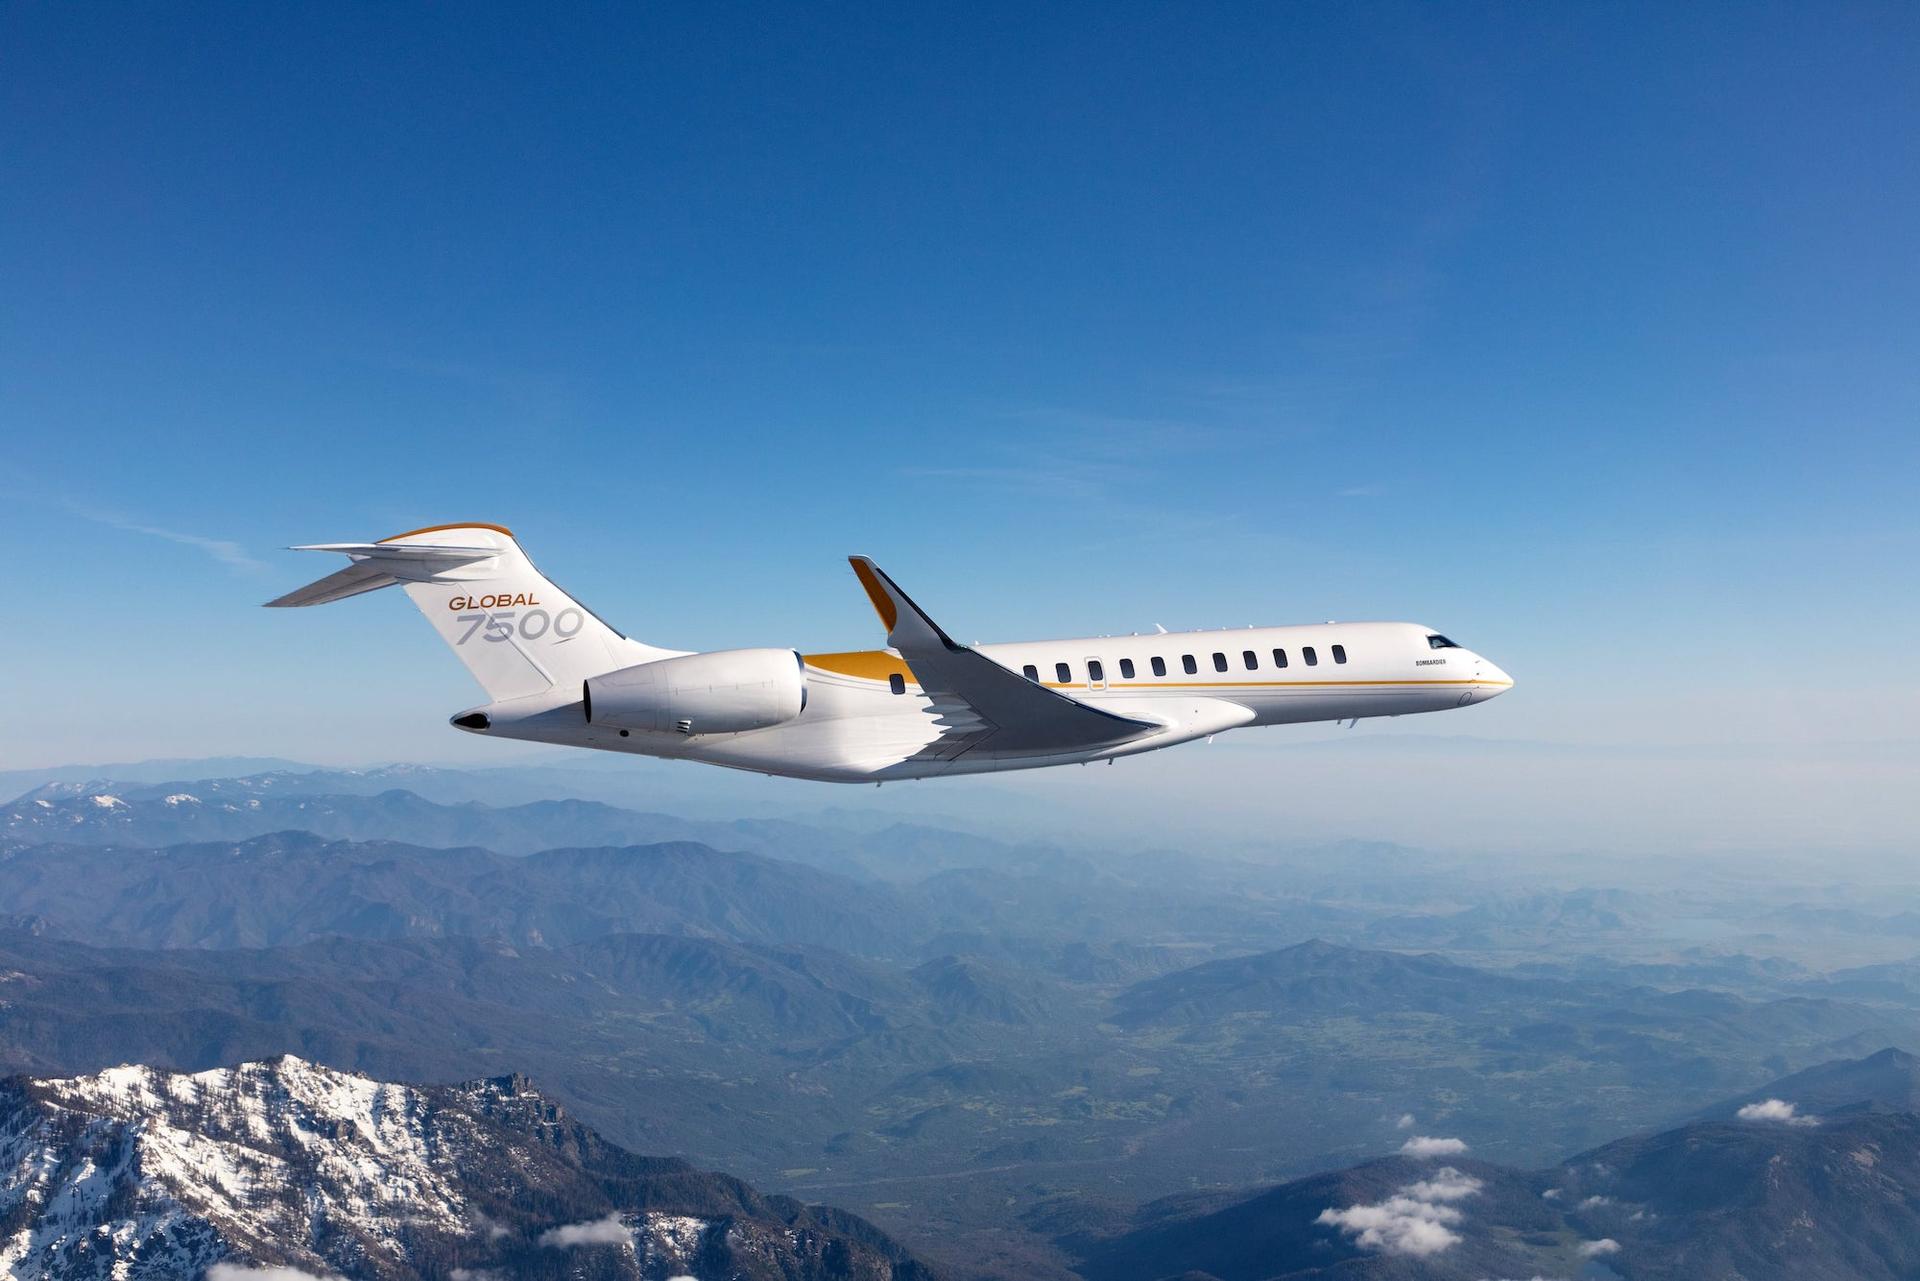 A Bombardier Global 7500 flying over snowy mountain tops.